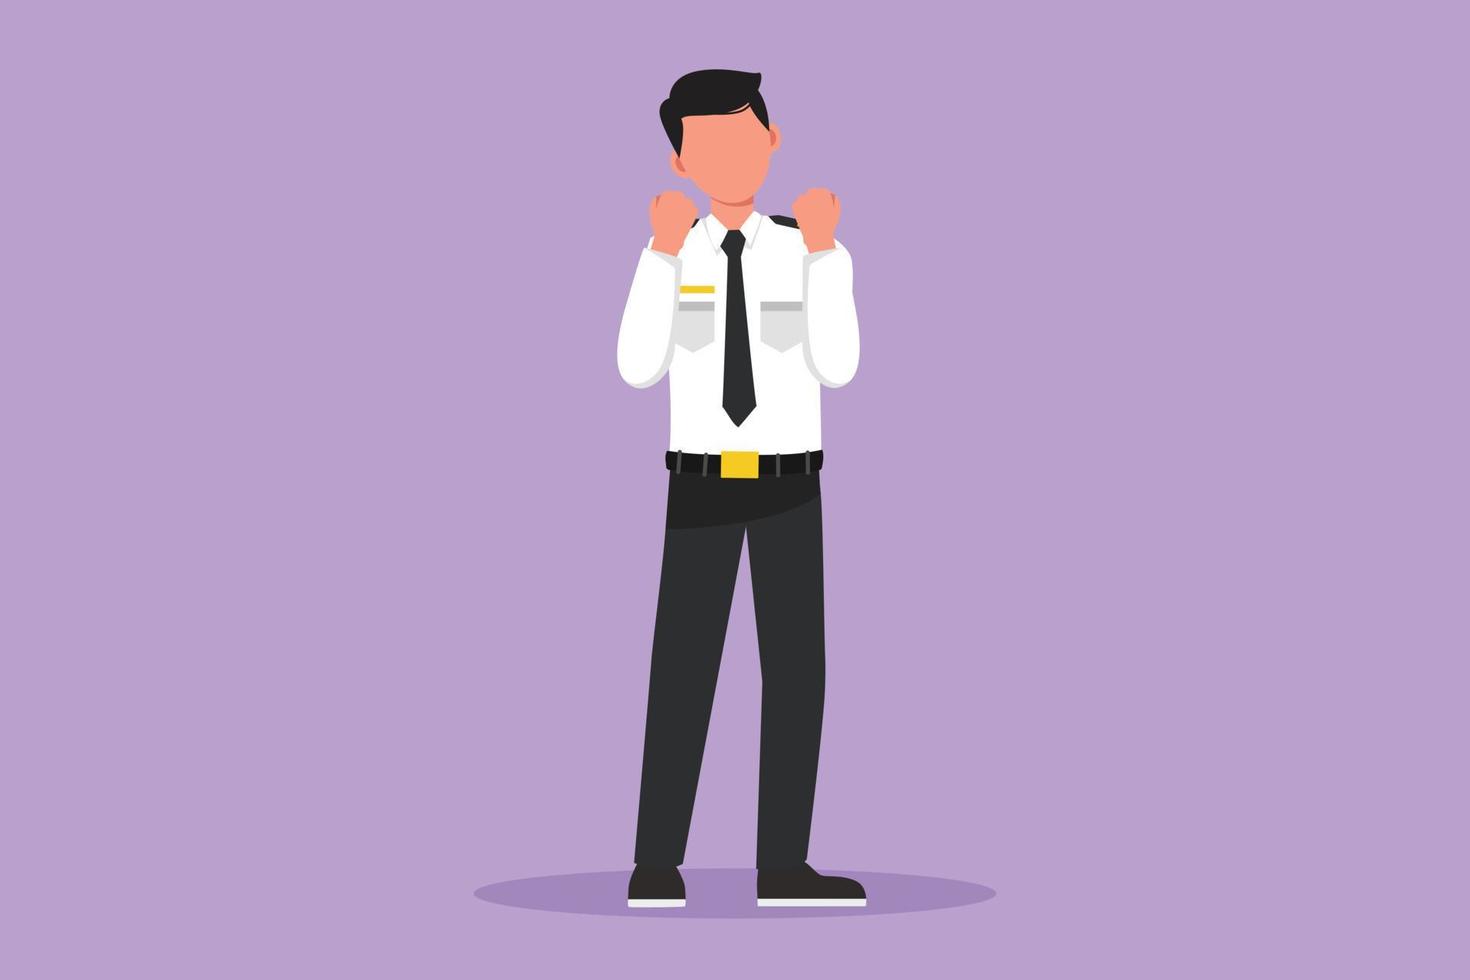 Character flat drawing flight attendant or steward standing in uniform with celebrate gesture prepare at airport for flying and serve passenger to their destination. Cartoon design vector illustration